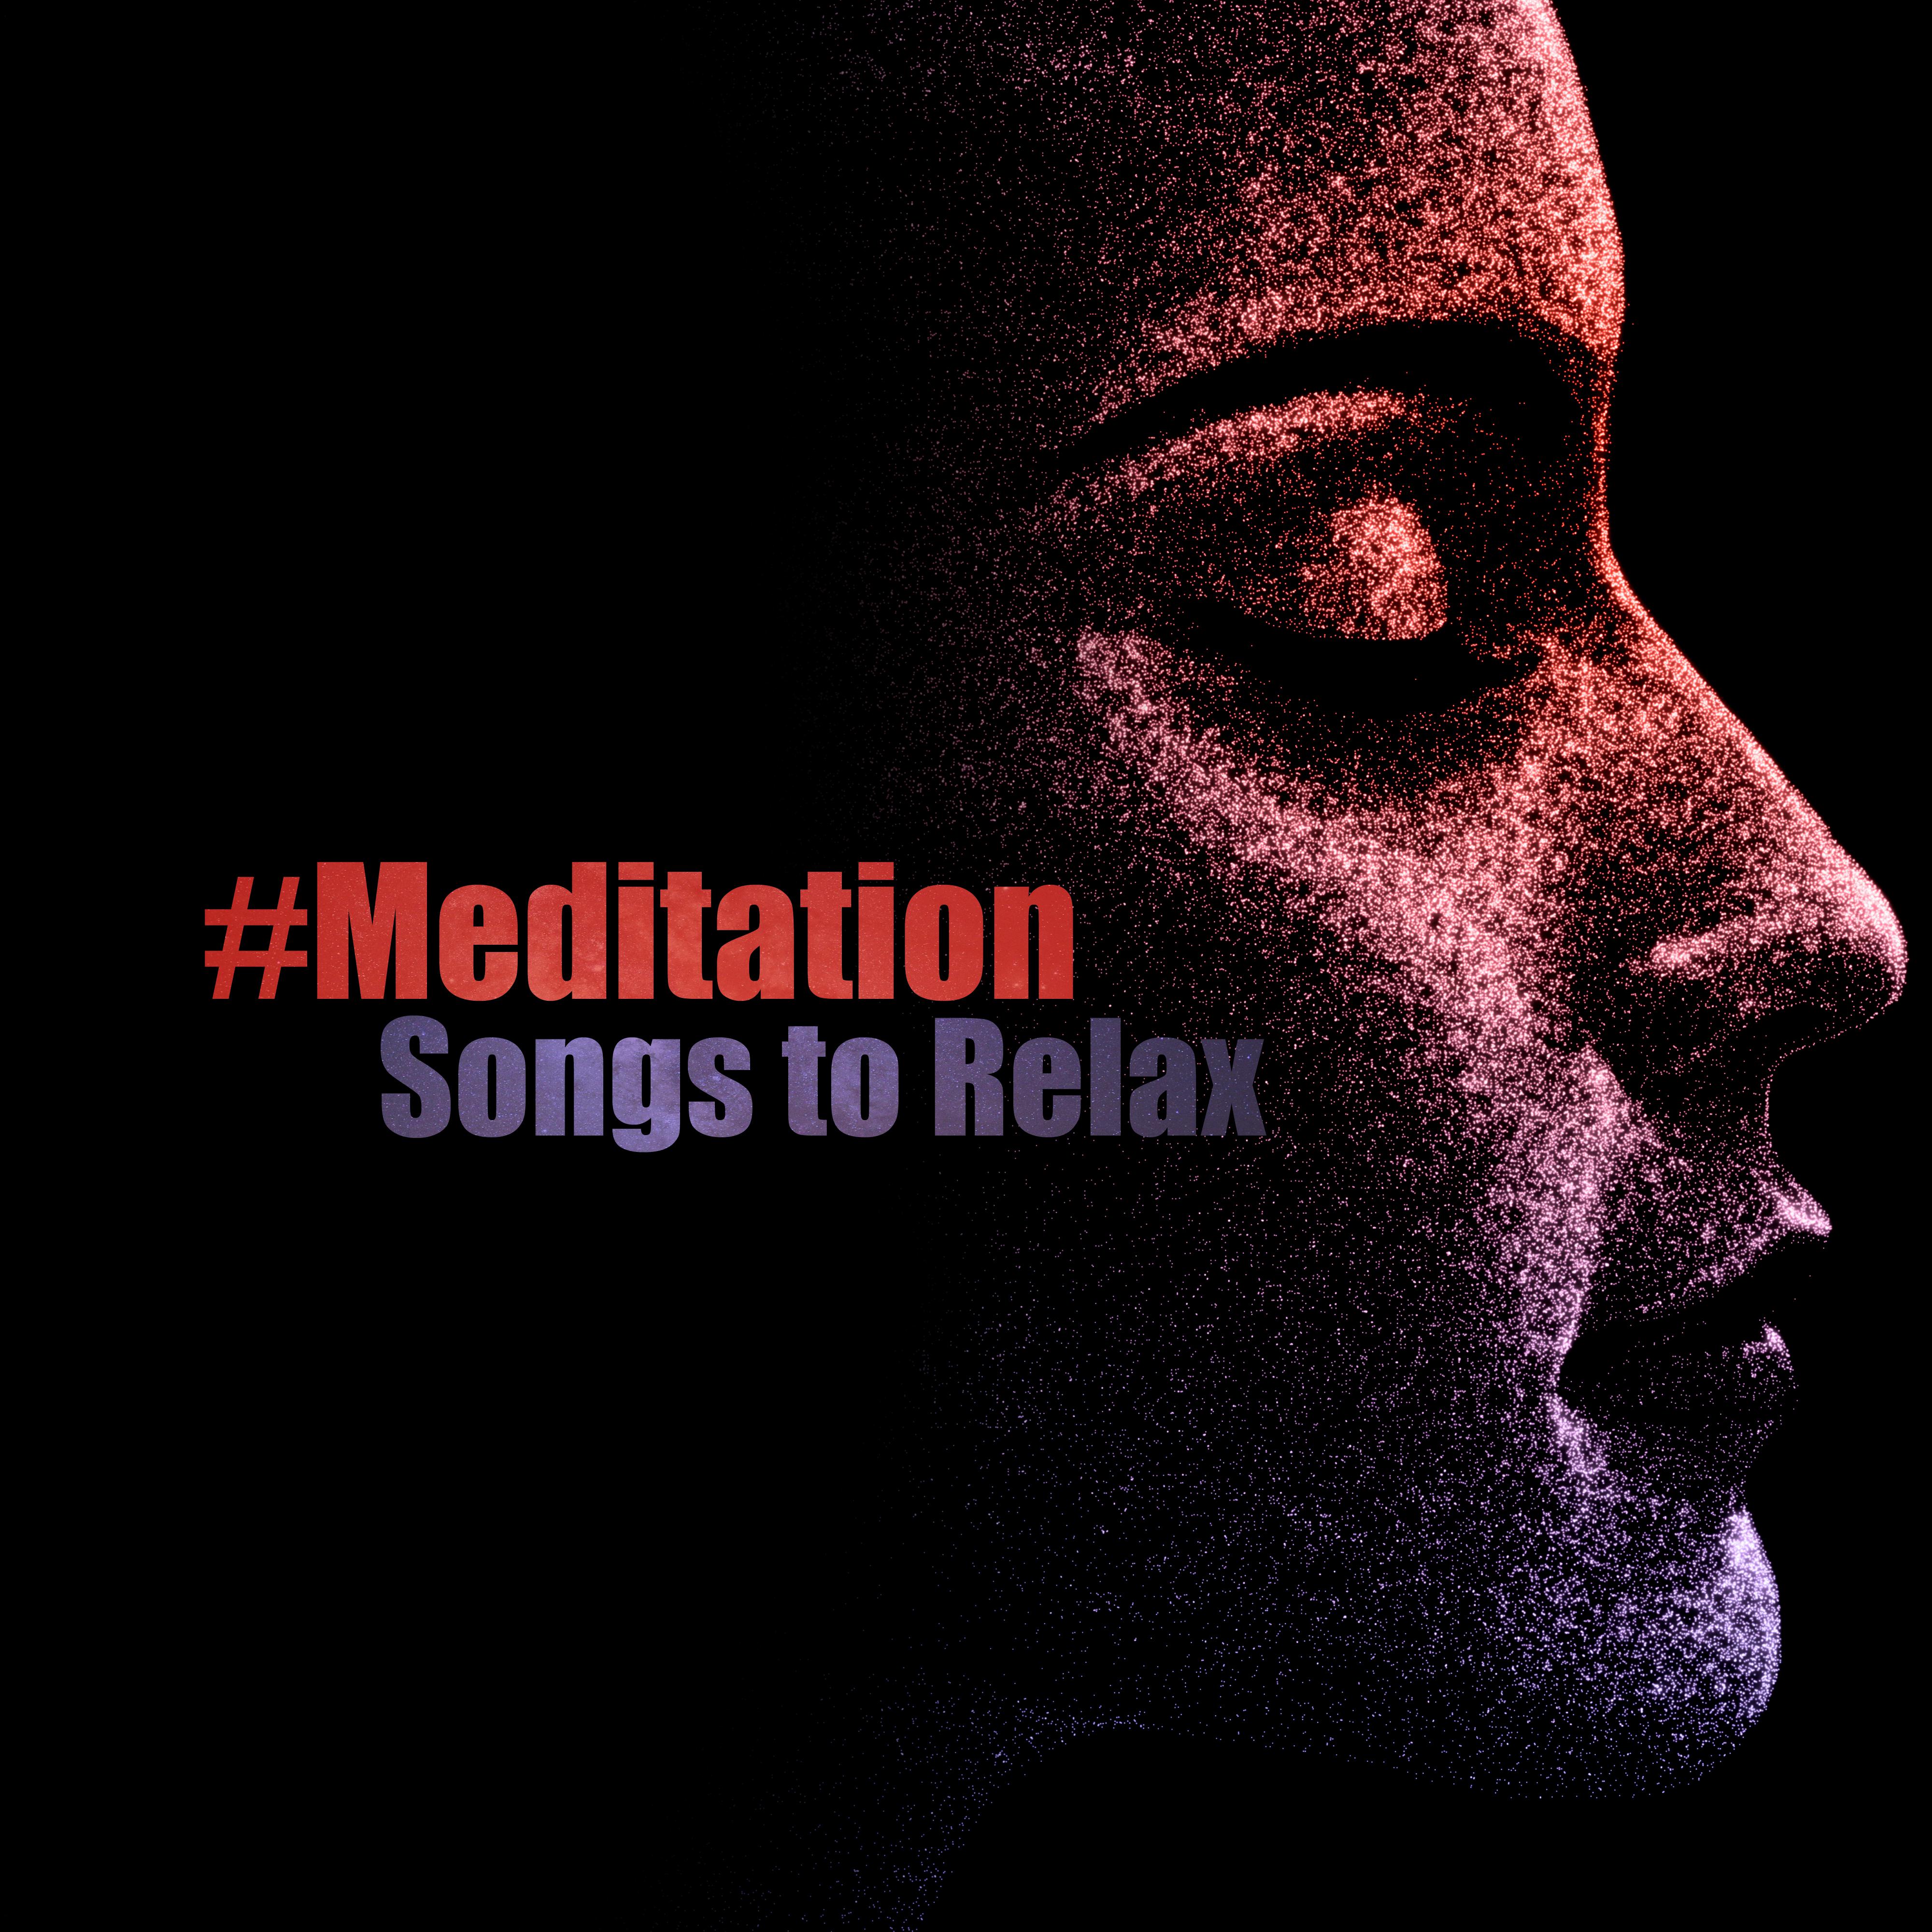 #Meditation Songs to Relax